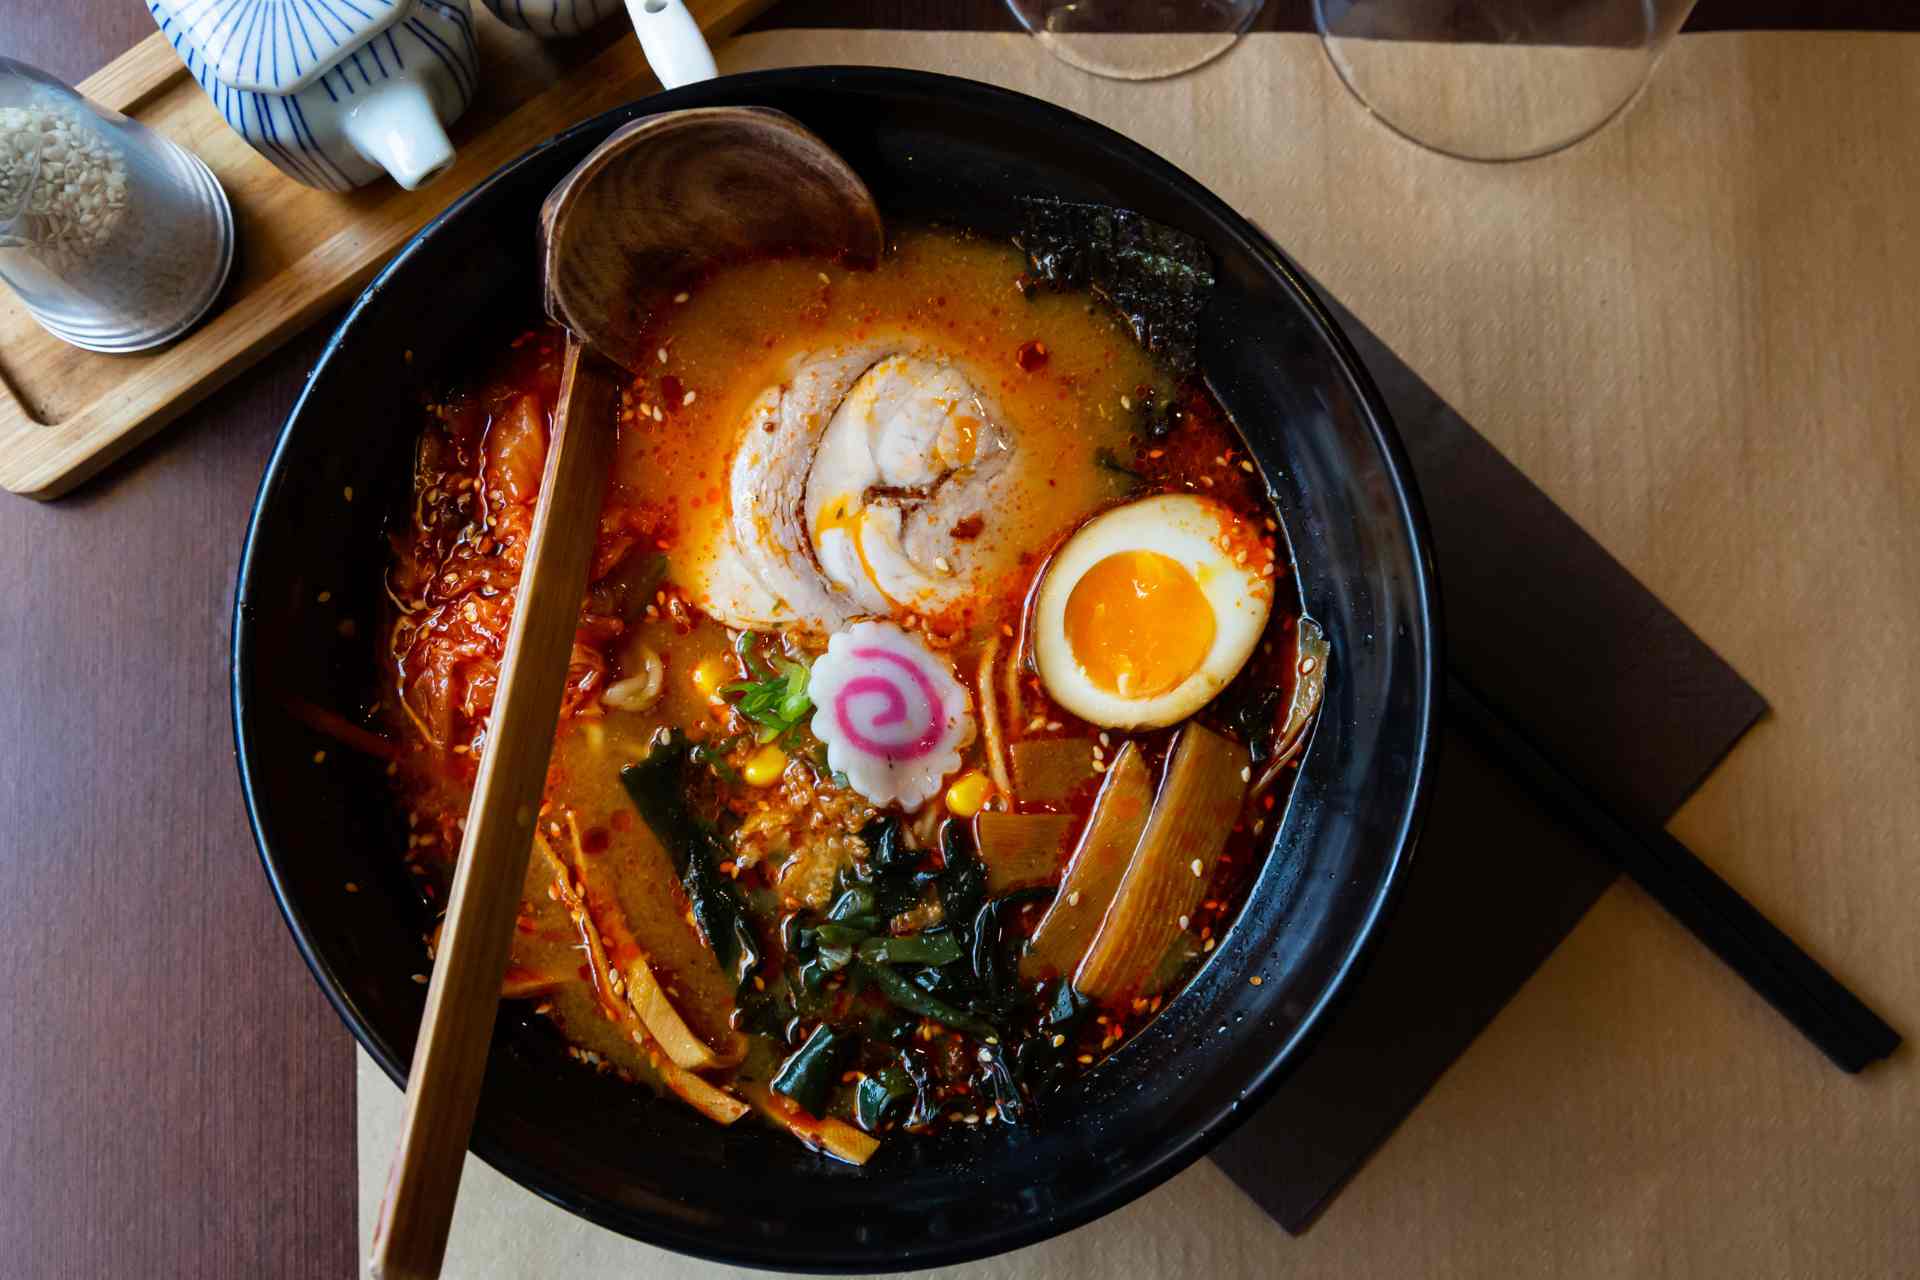 10 Restaurants to Try for Cheap Eats in Orion Springfield Central - Hikari Ramen